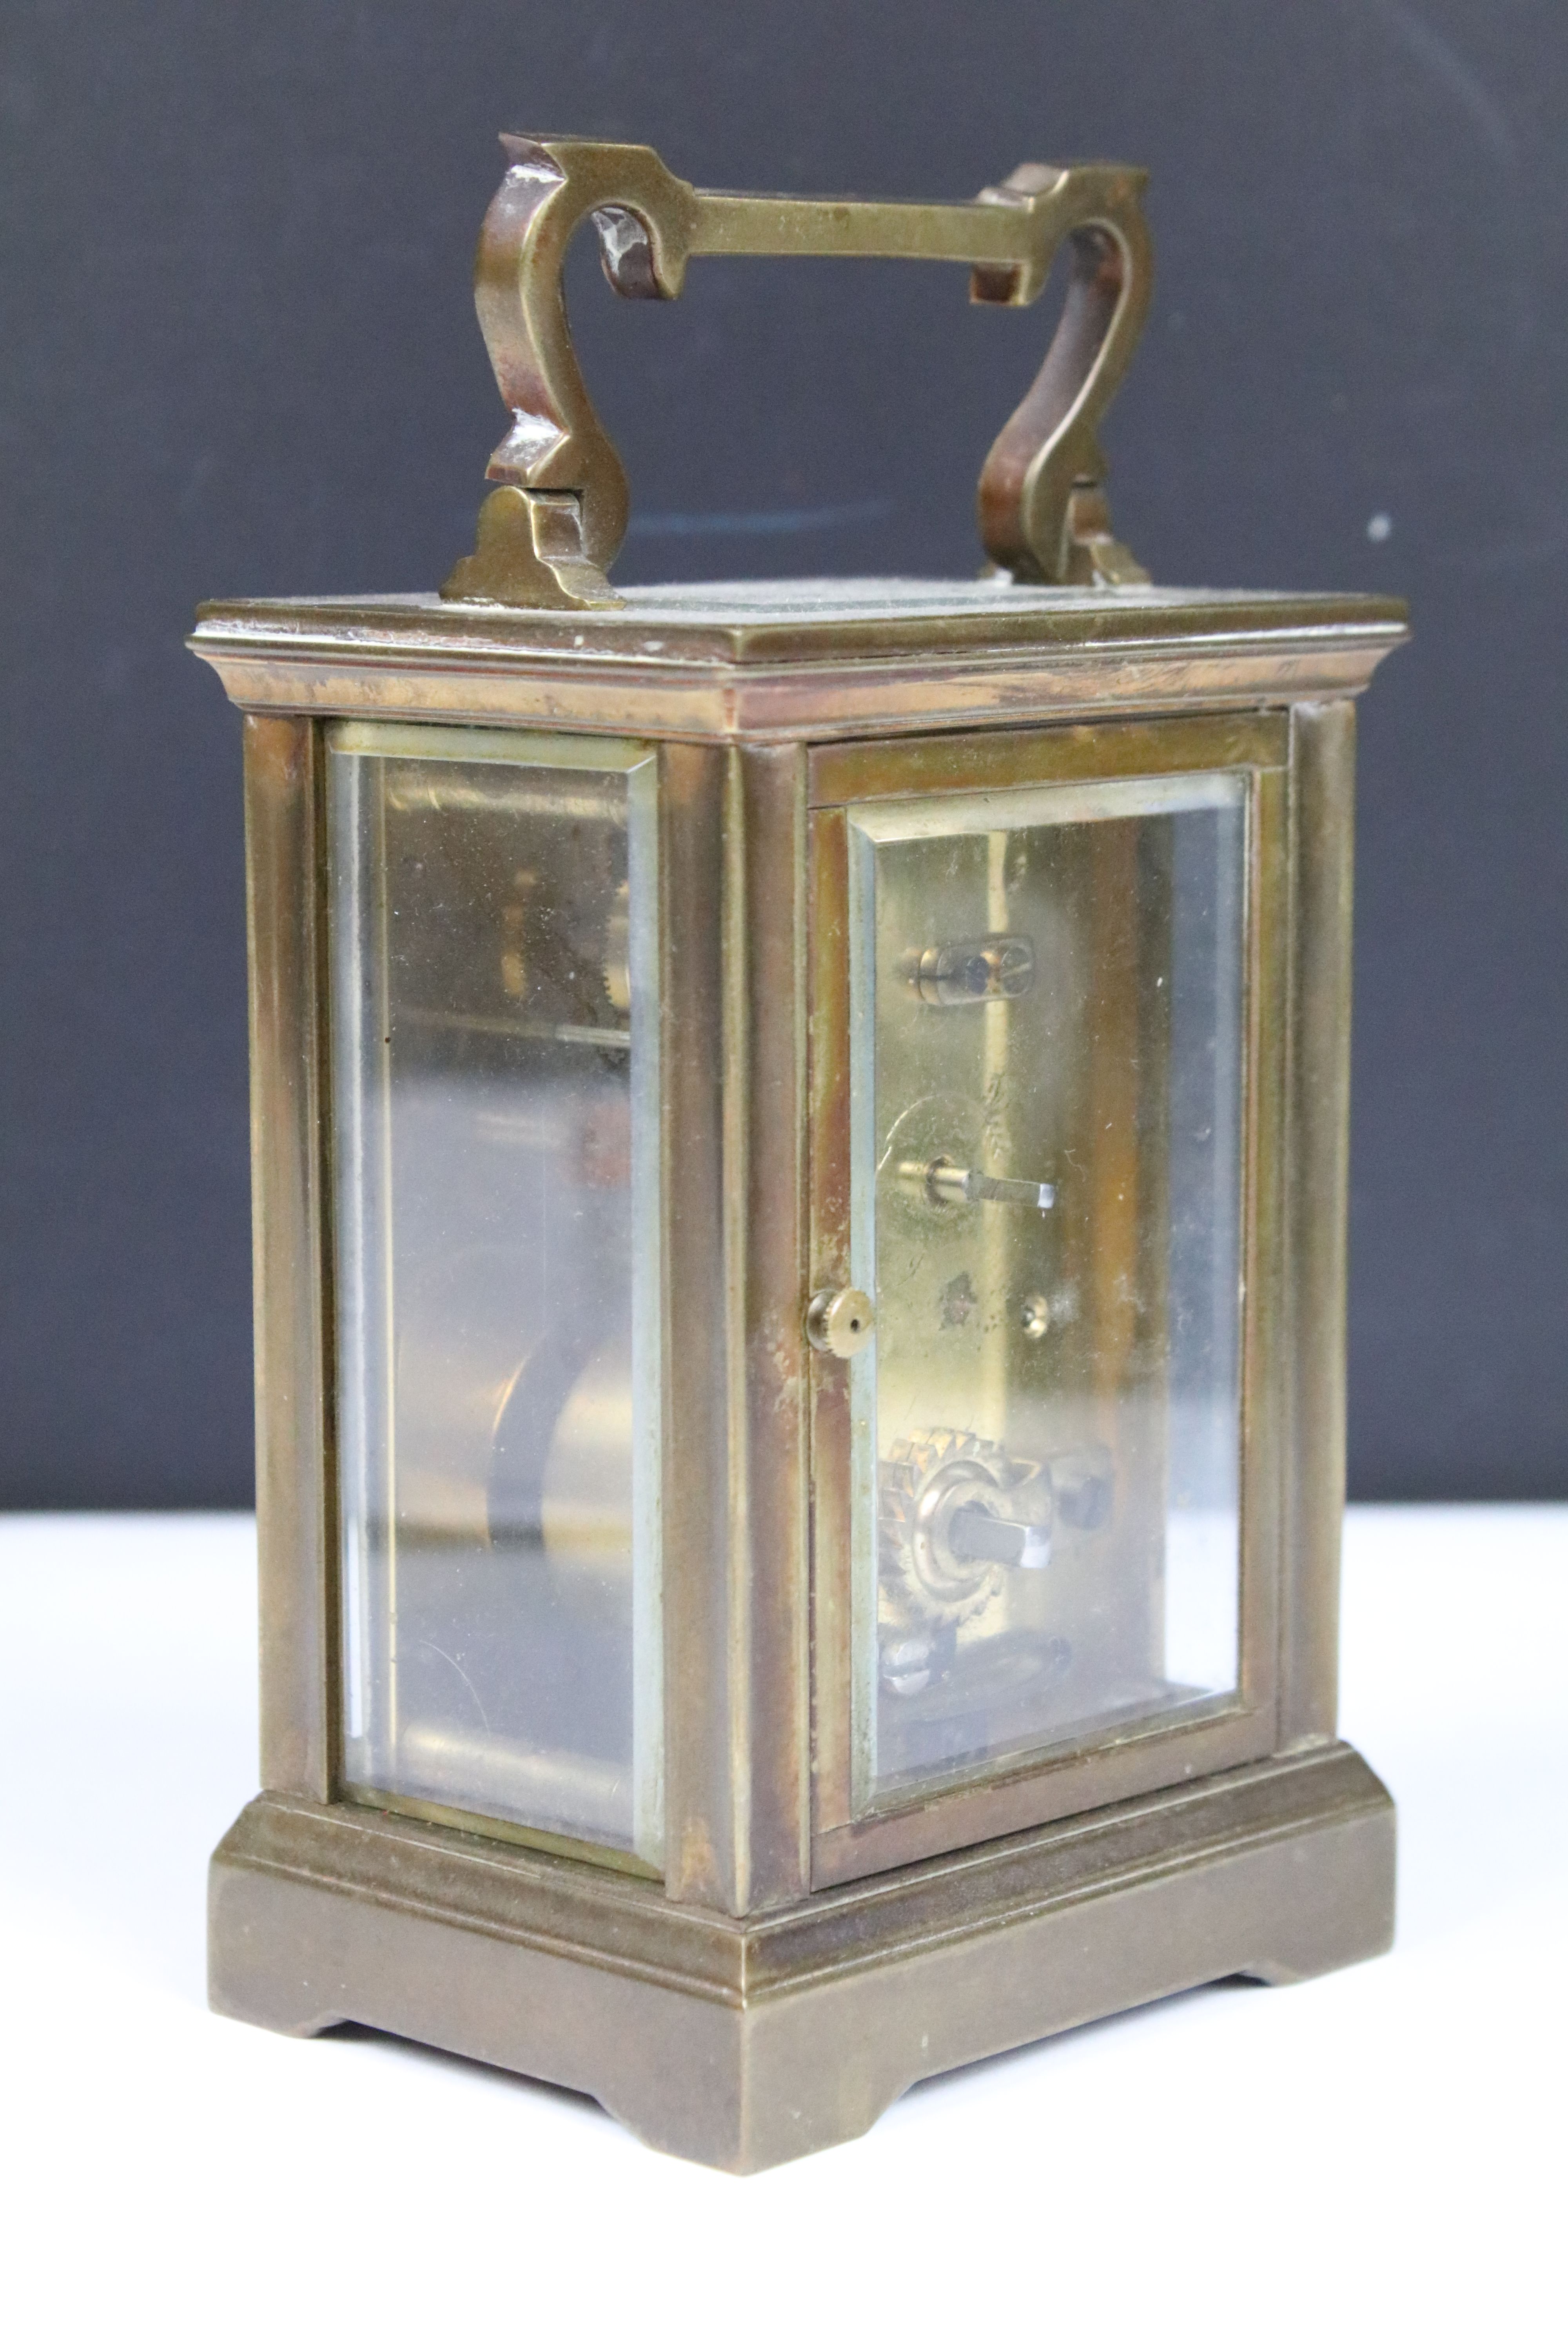 Two vintage brass cased carriage clocks with beveled glass panels and white enamel dials. - Image 7 of 8